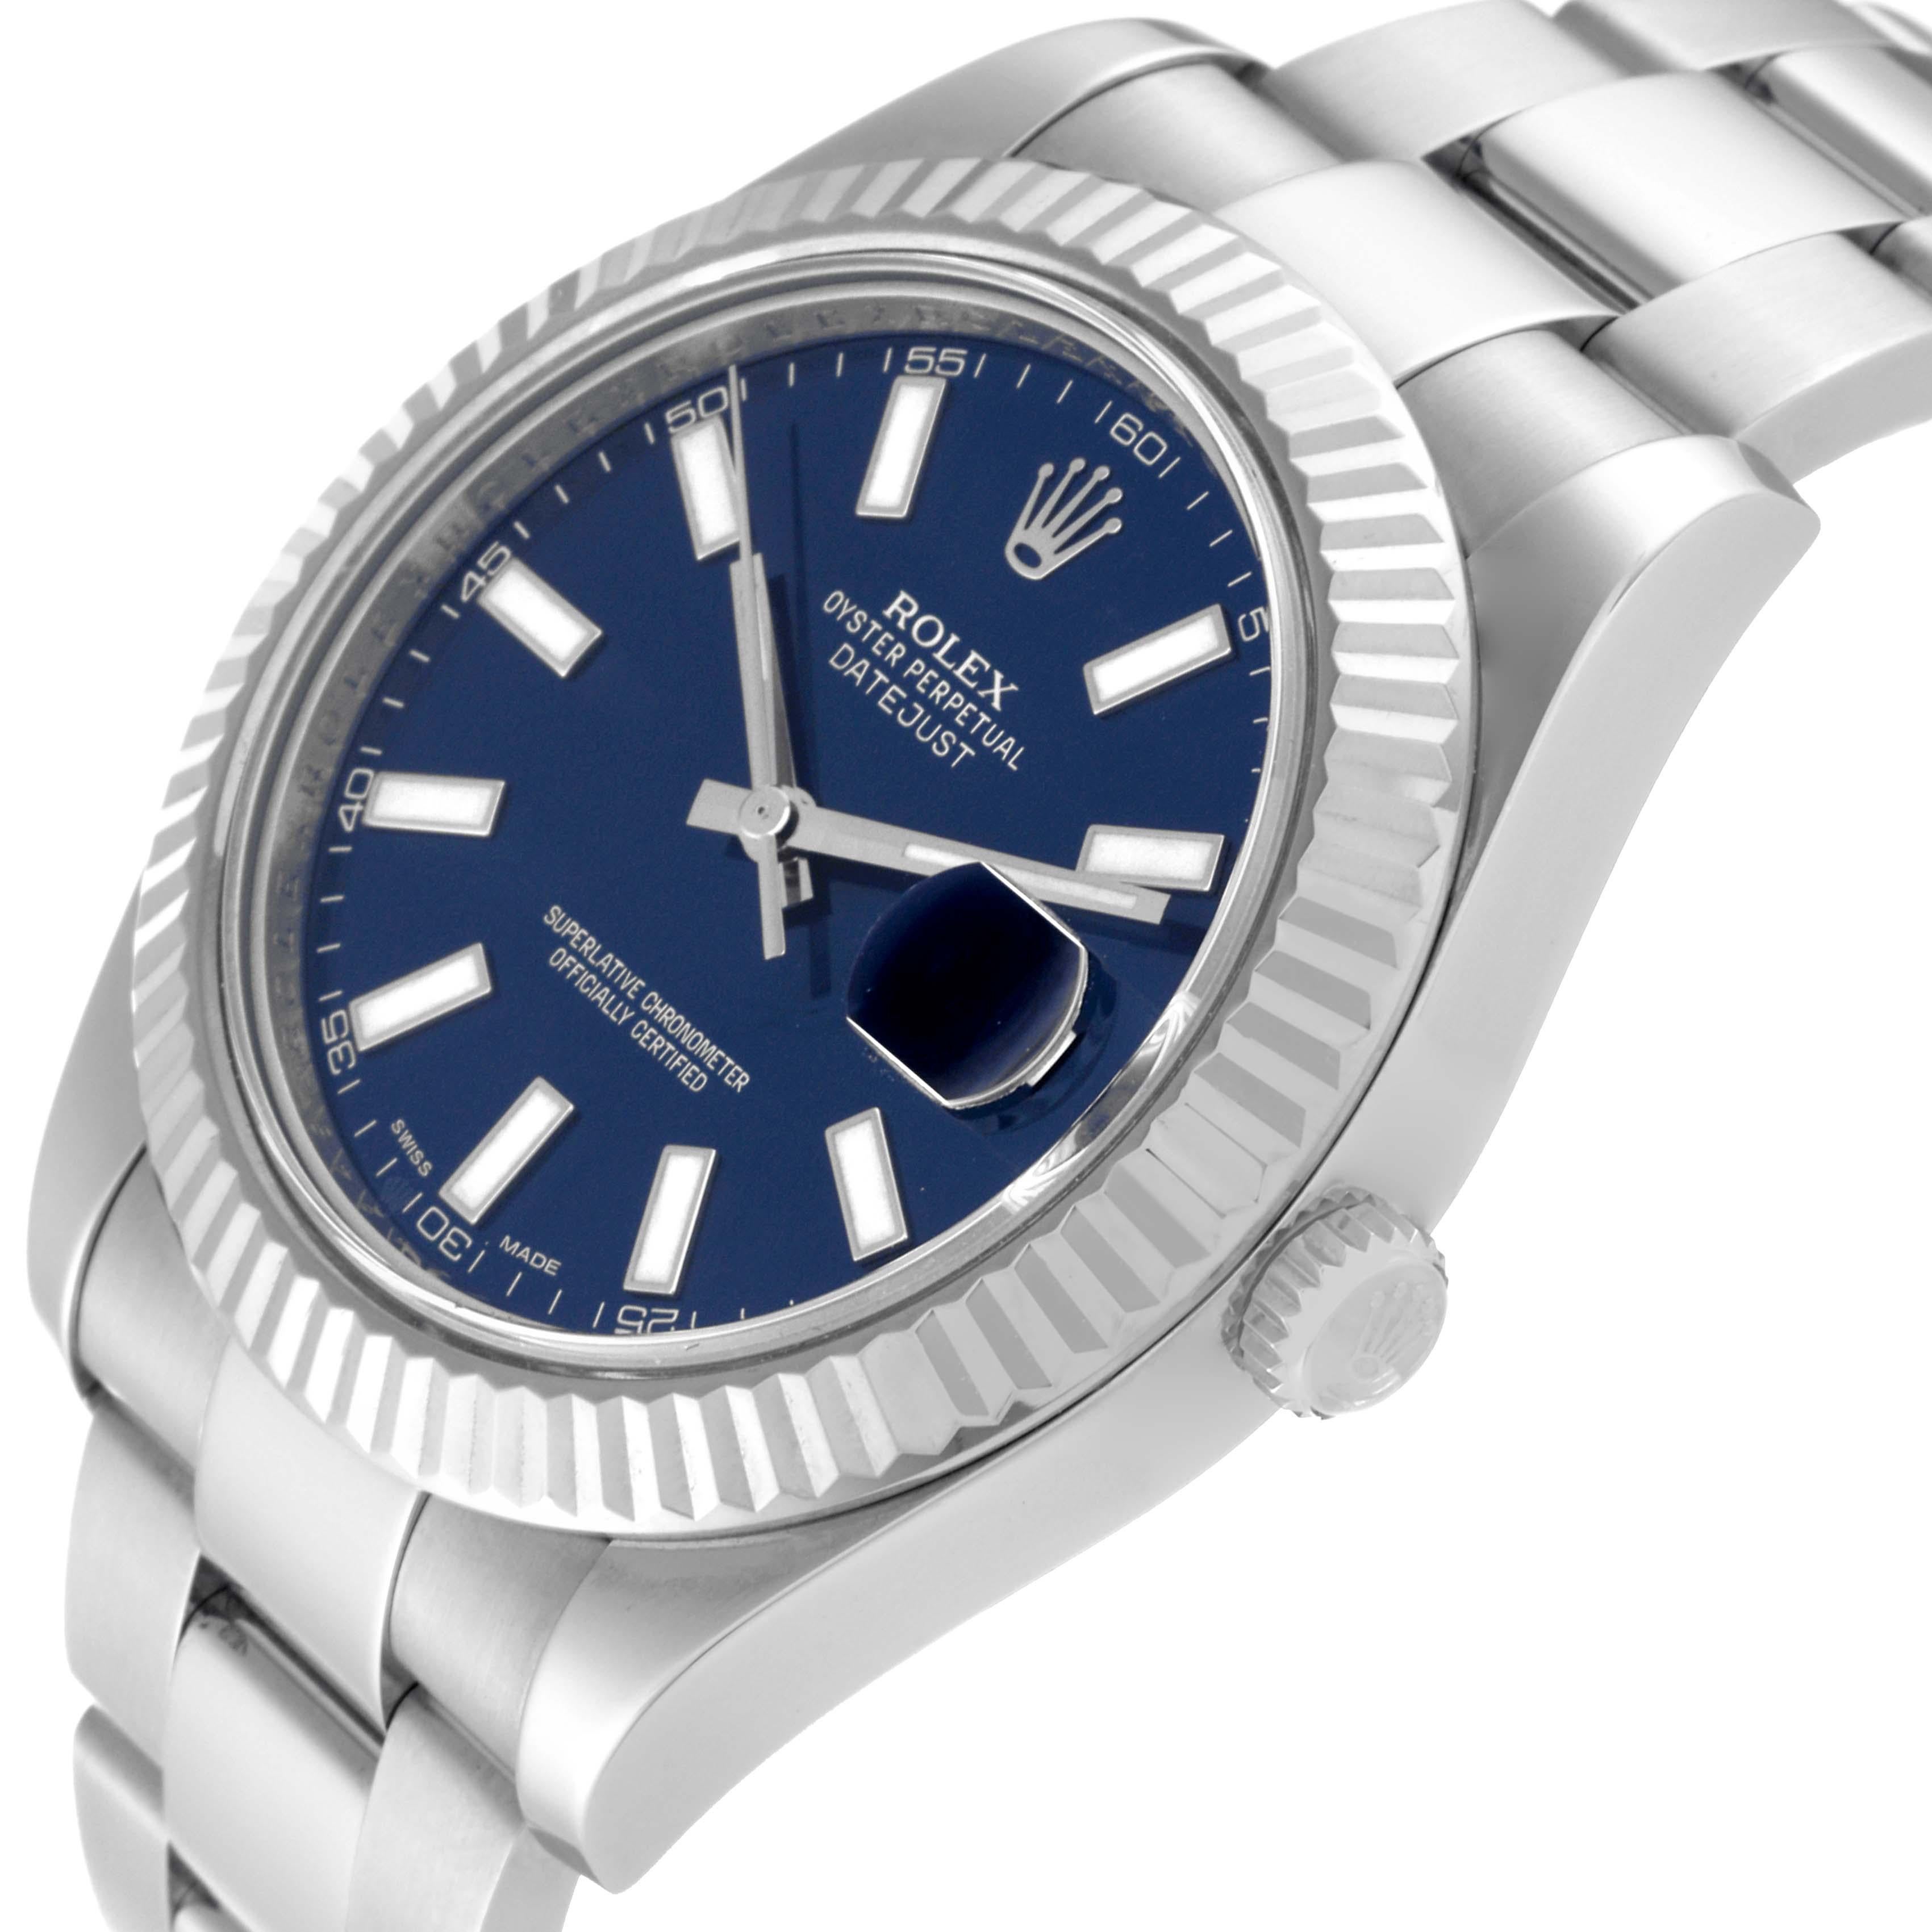 Rolex Datejust II 41 Blue Dial Steel White Gold Mens Watch 116334 For Sale 6